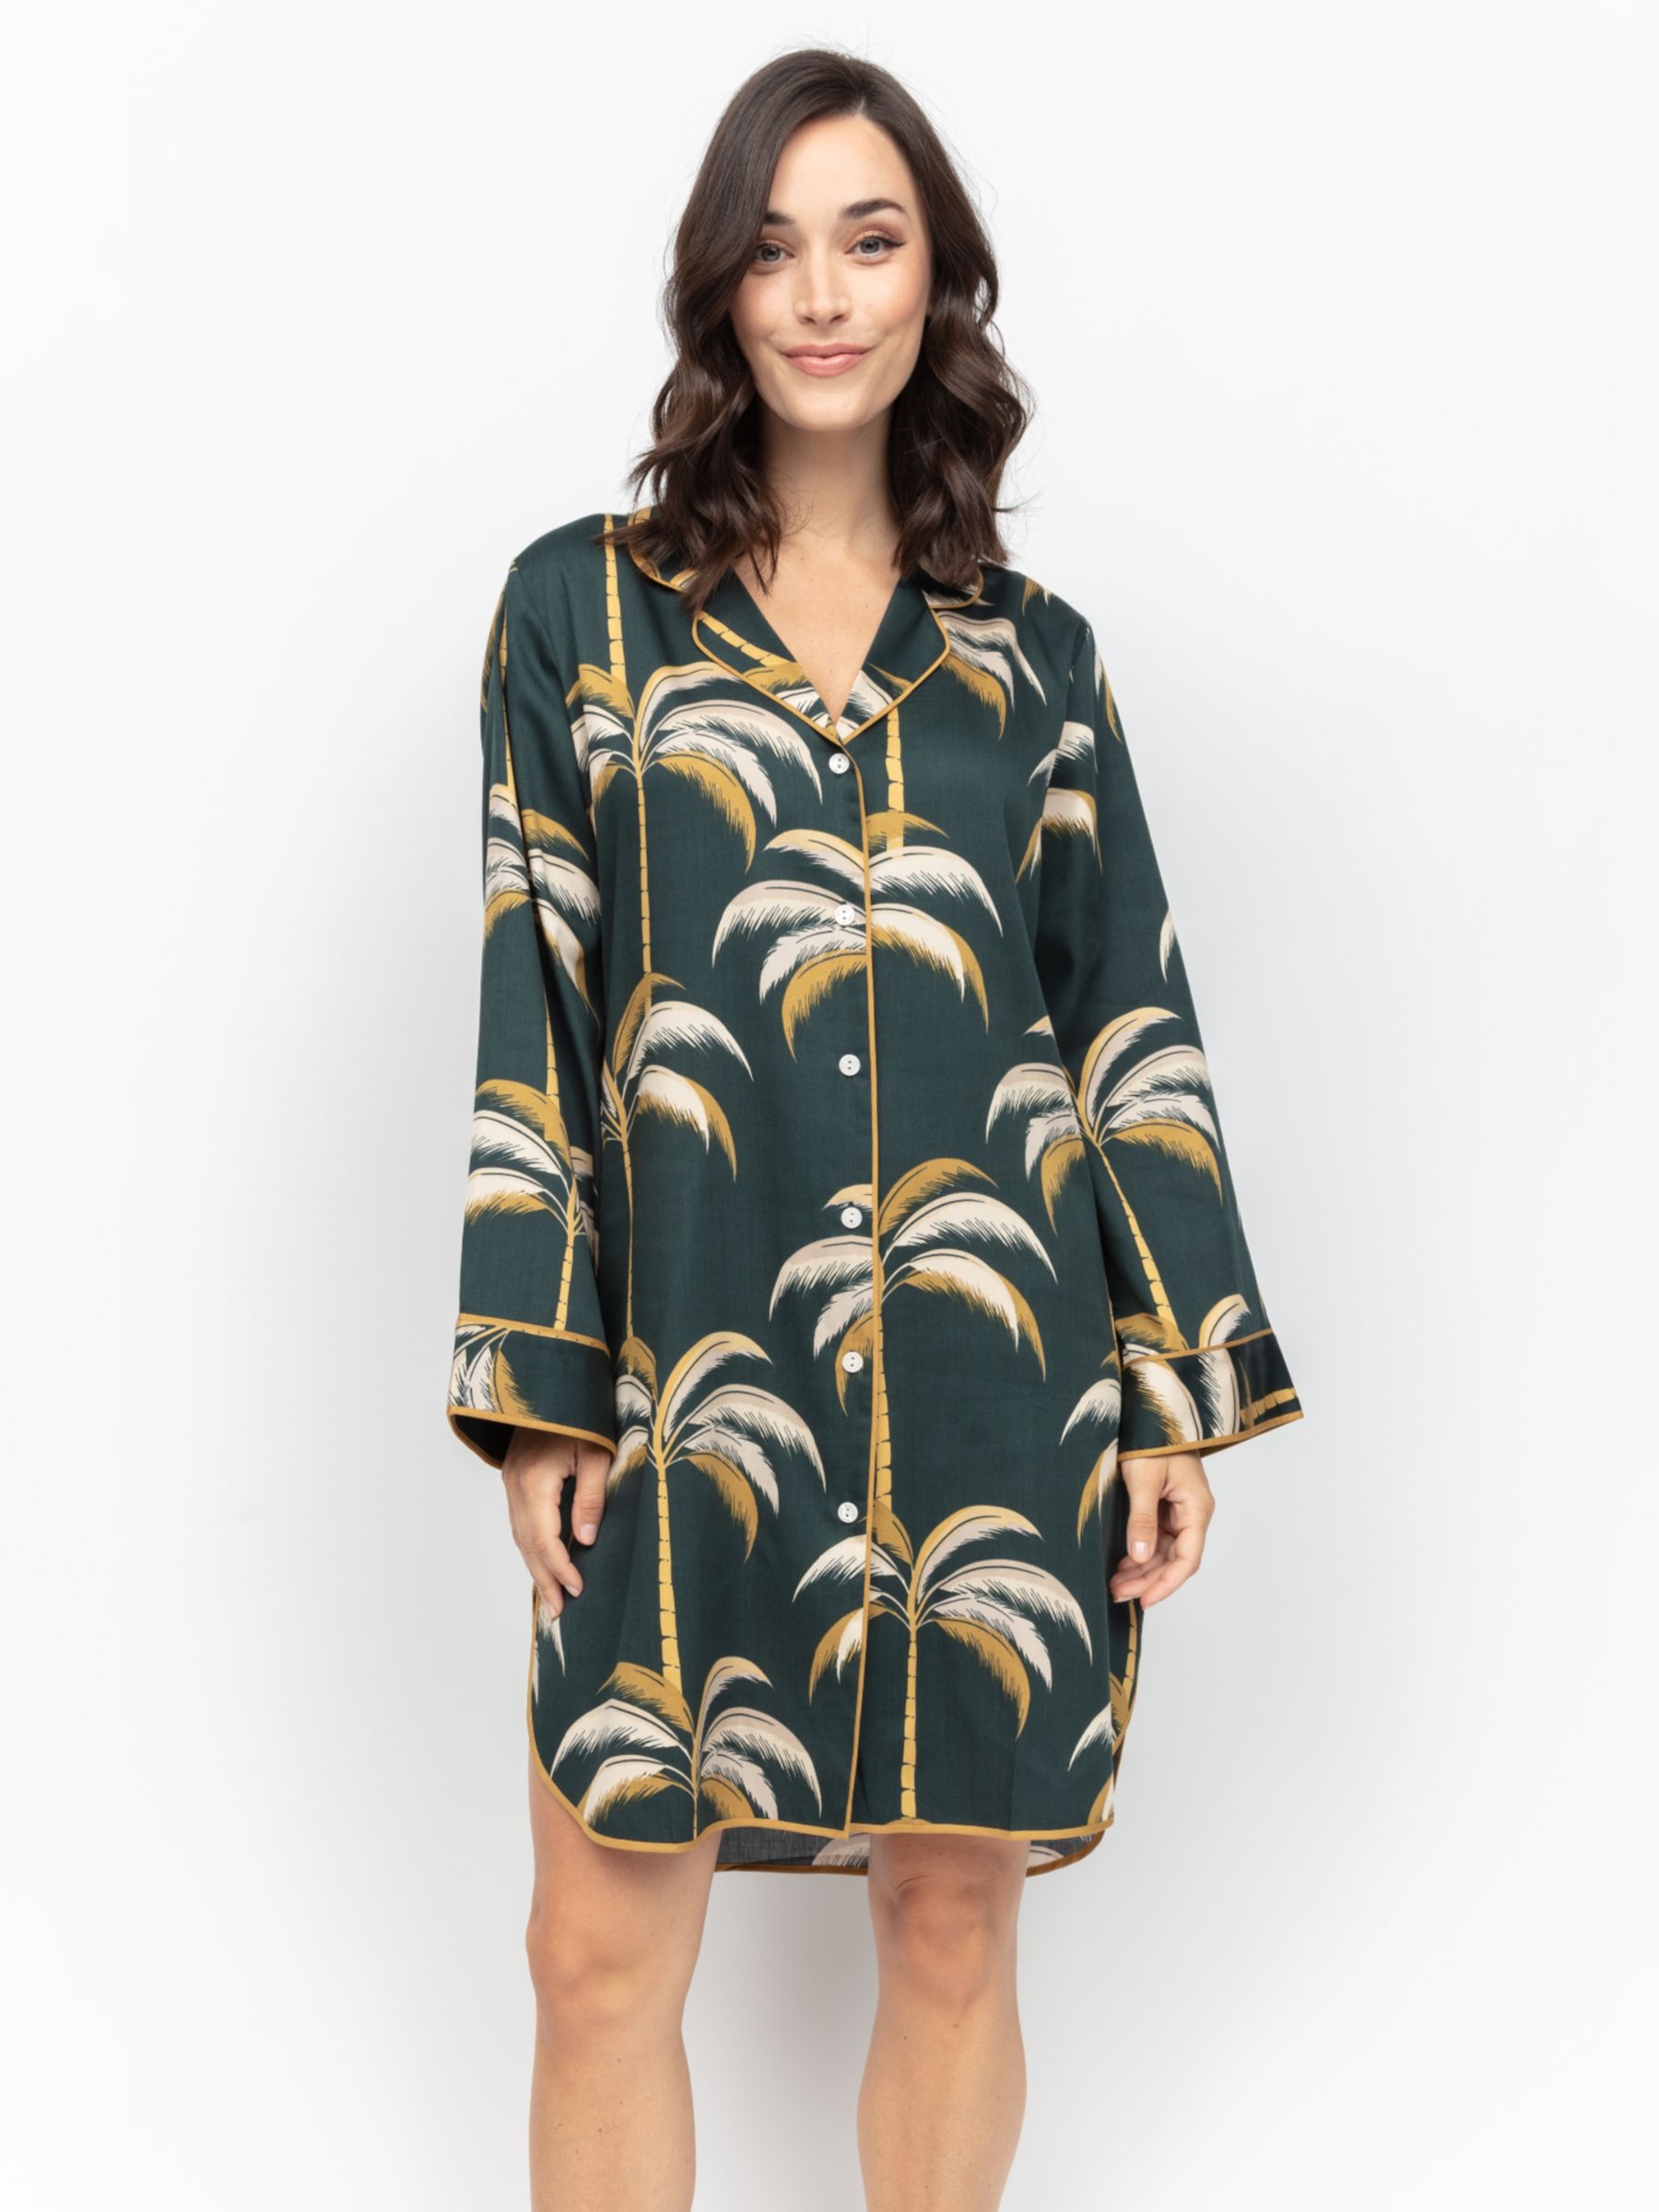 Buy Fable & Eve Pimlico Palm Print Nightshirt, Emerald Green Online at johnlewis.com